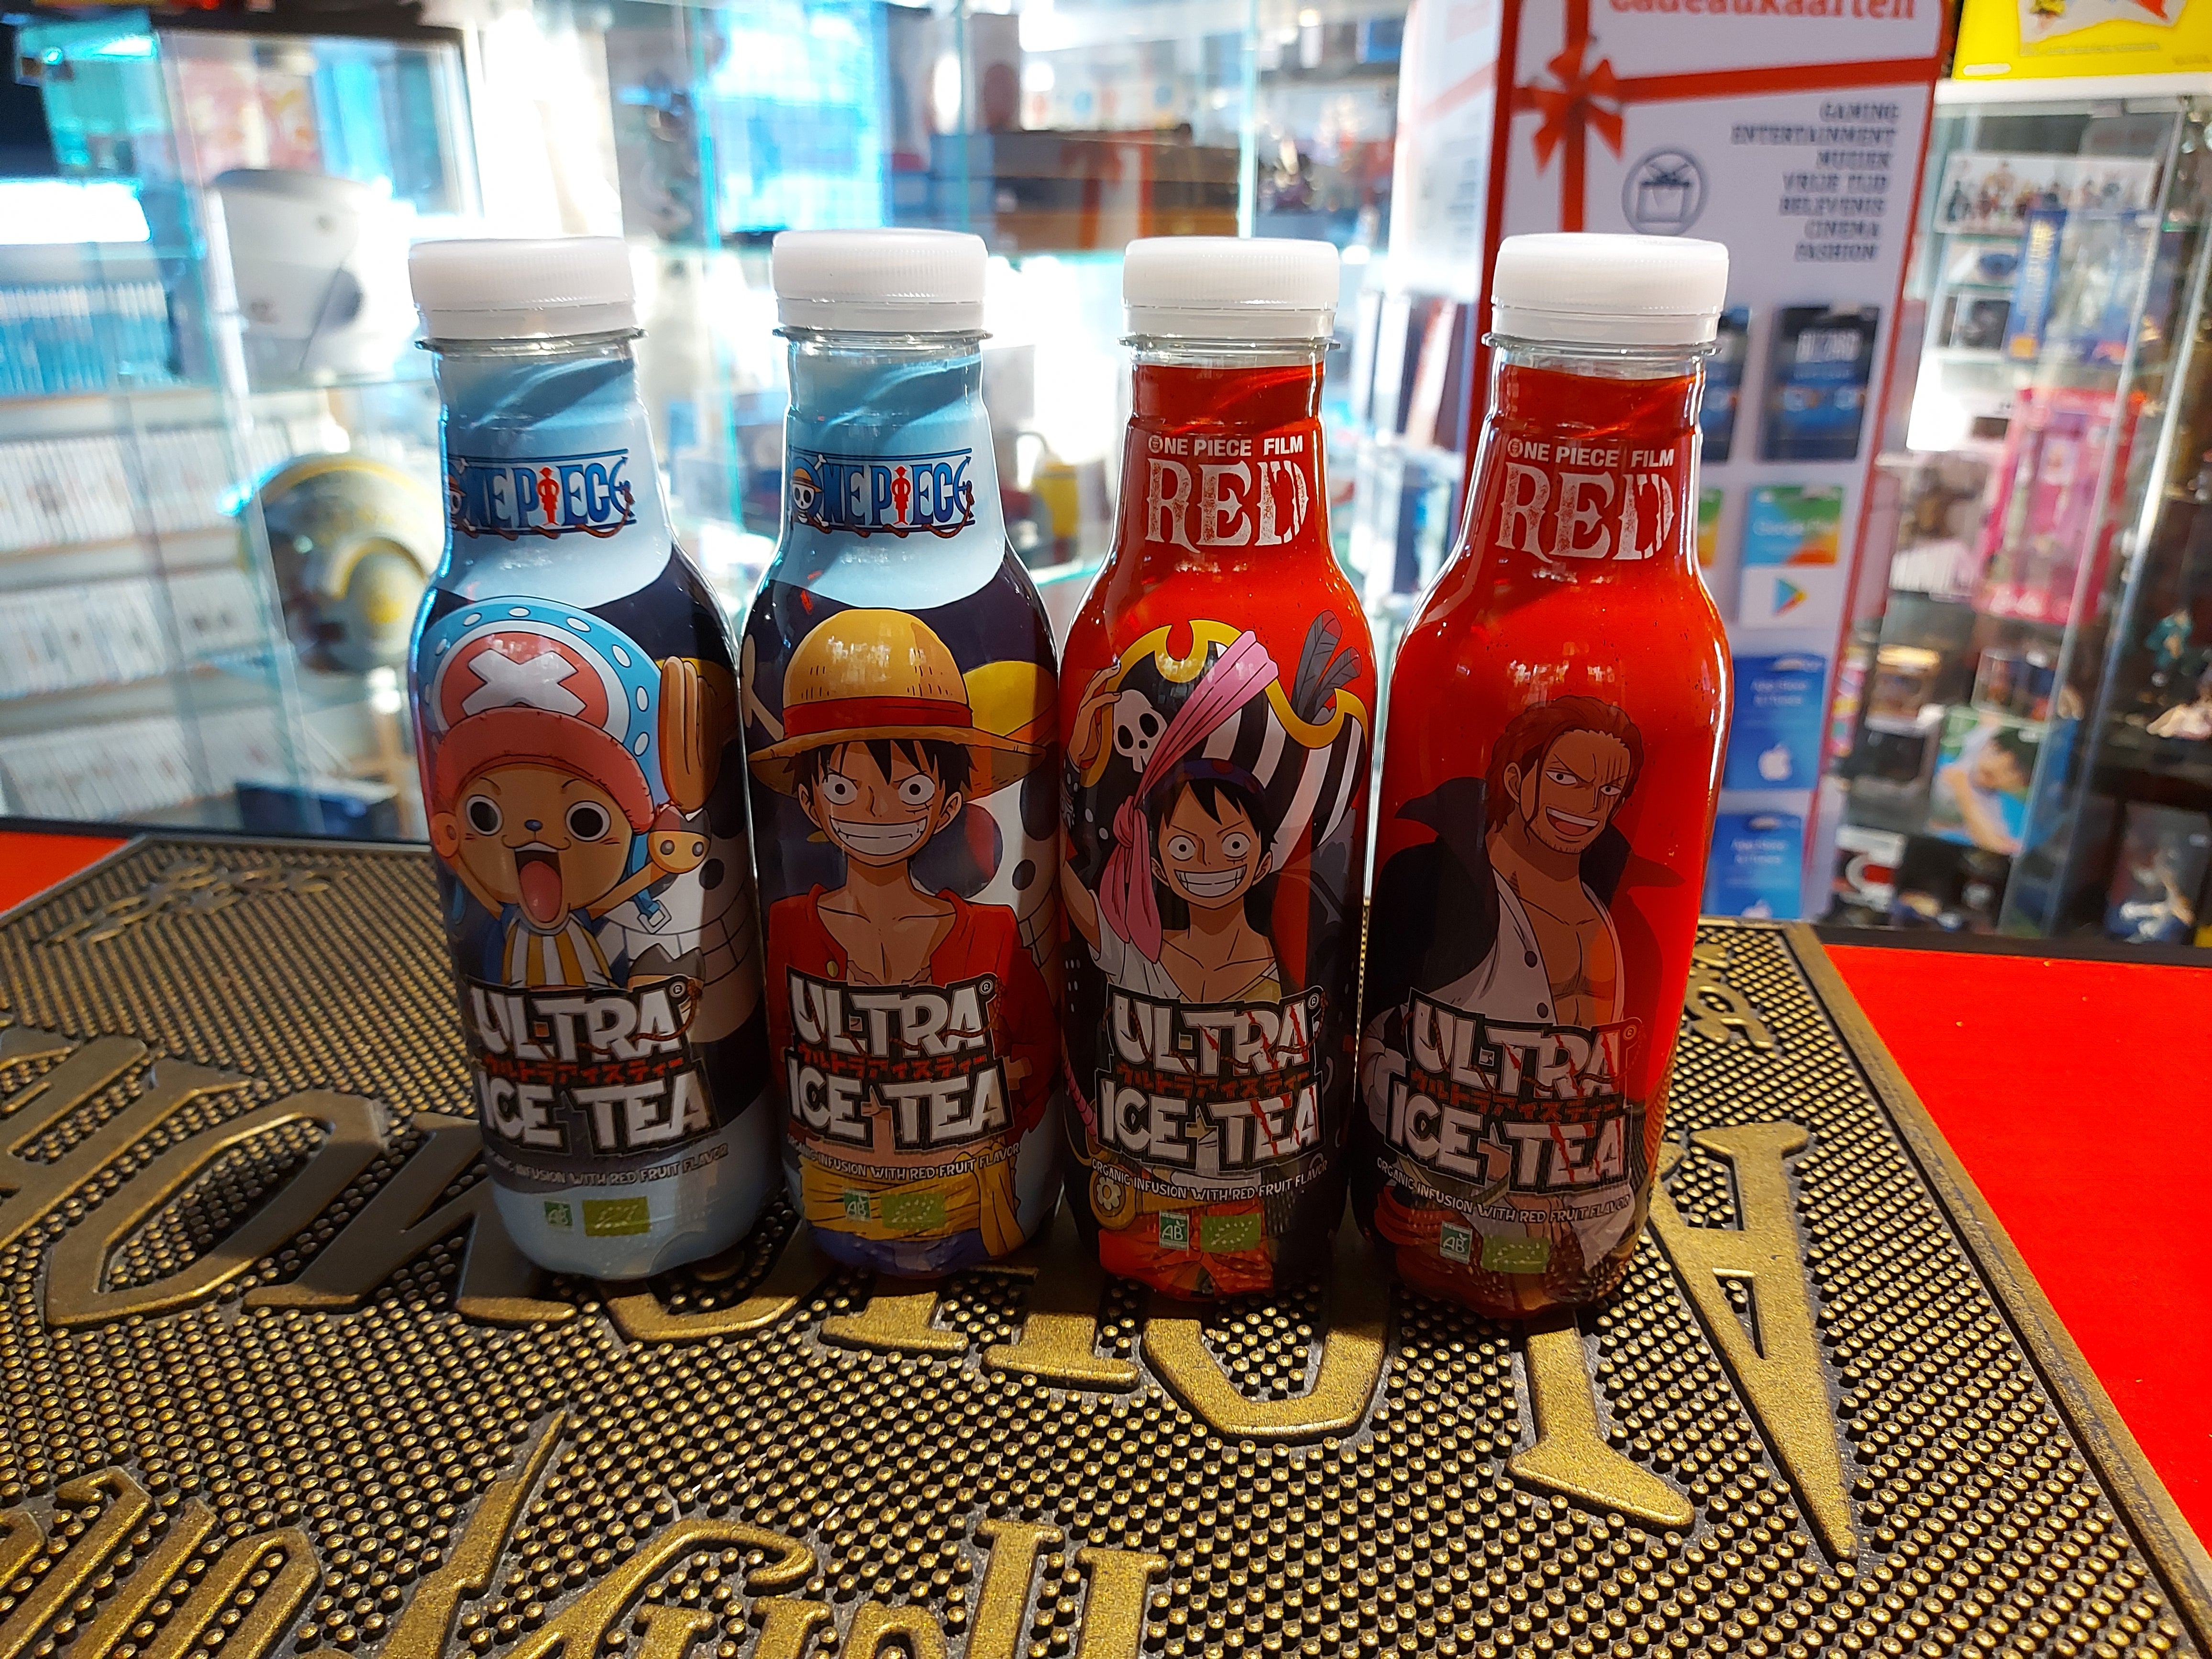 ONE PIECE RED - Ultra Ice Tea - Assortiment - Bottle 50 Cl